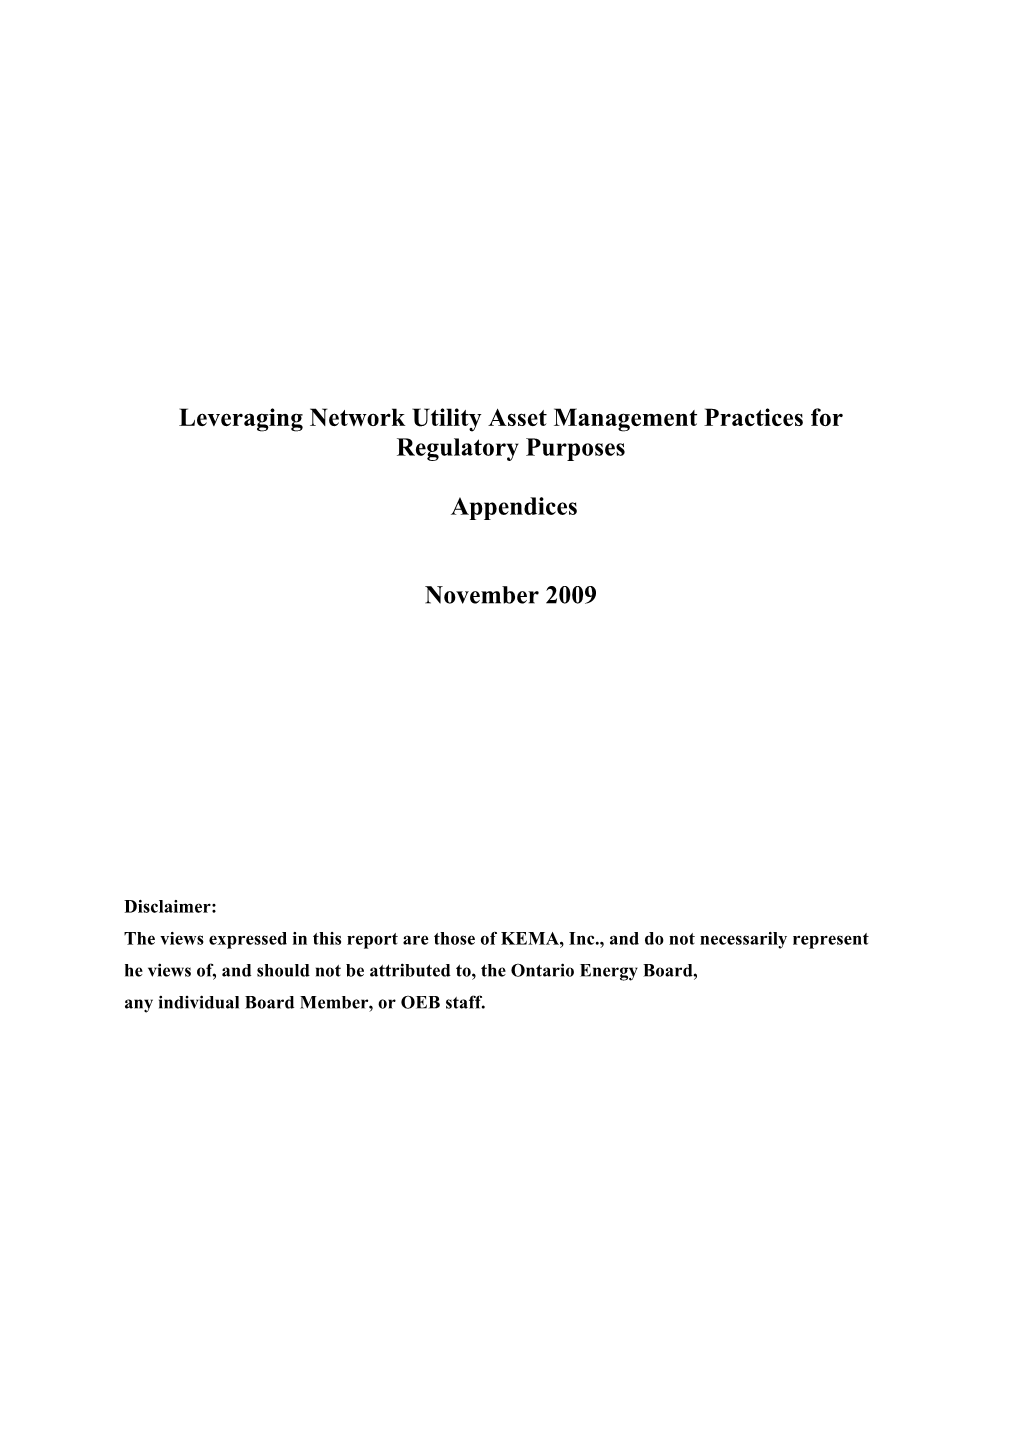 Leveraging Network Utility Asset Management Practices for Regulatory Purposes